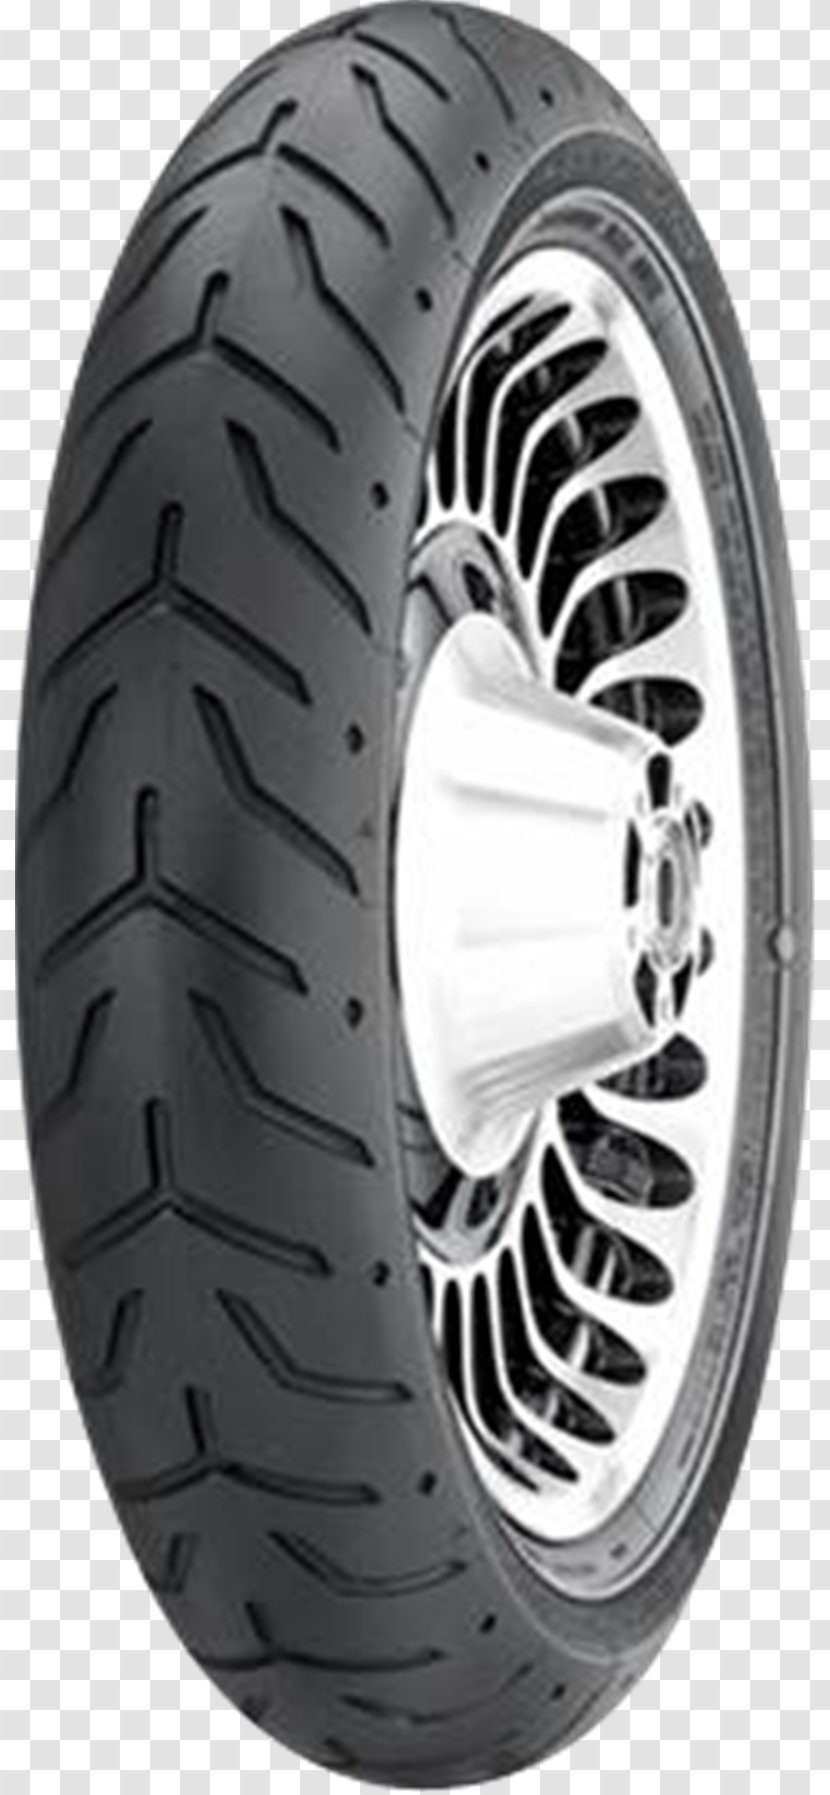 Tread Tire Harley-Davidson Alloy Wheel Motorcycle - Tires Transparent PNG